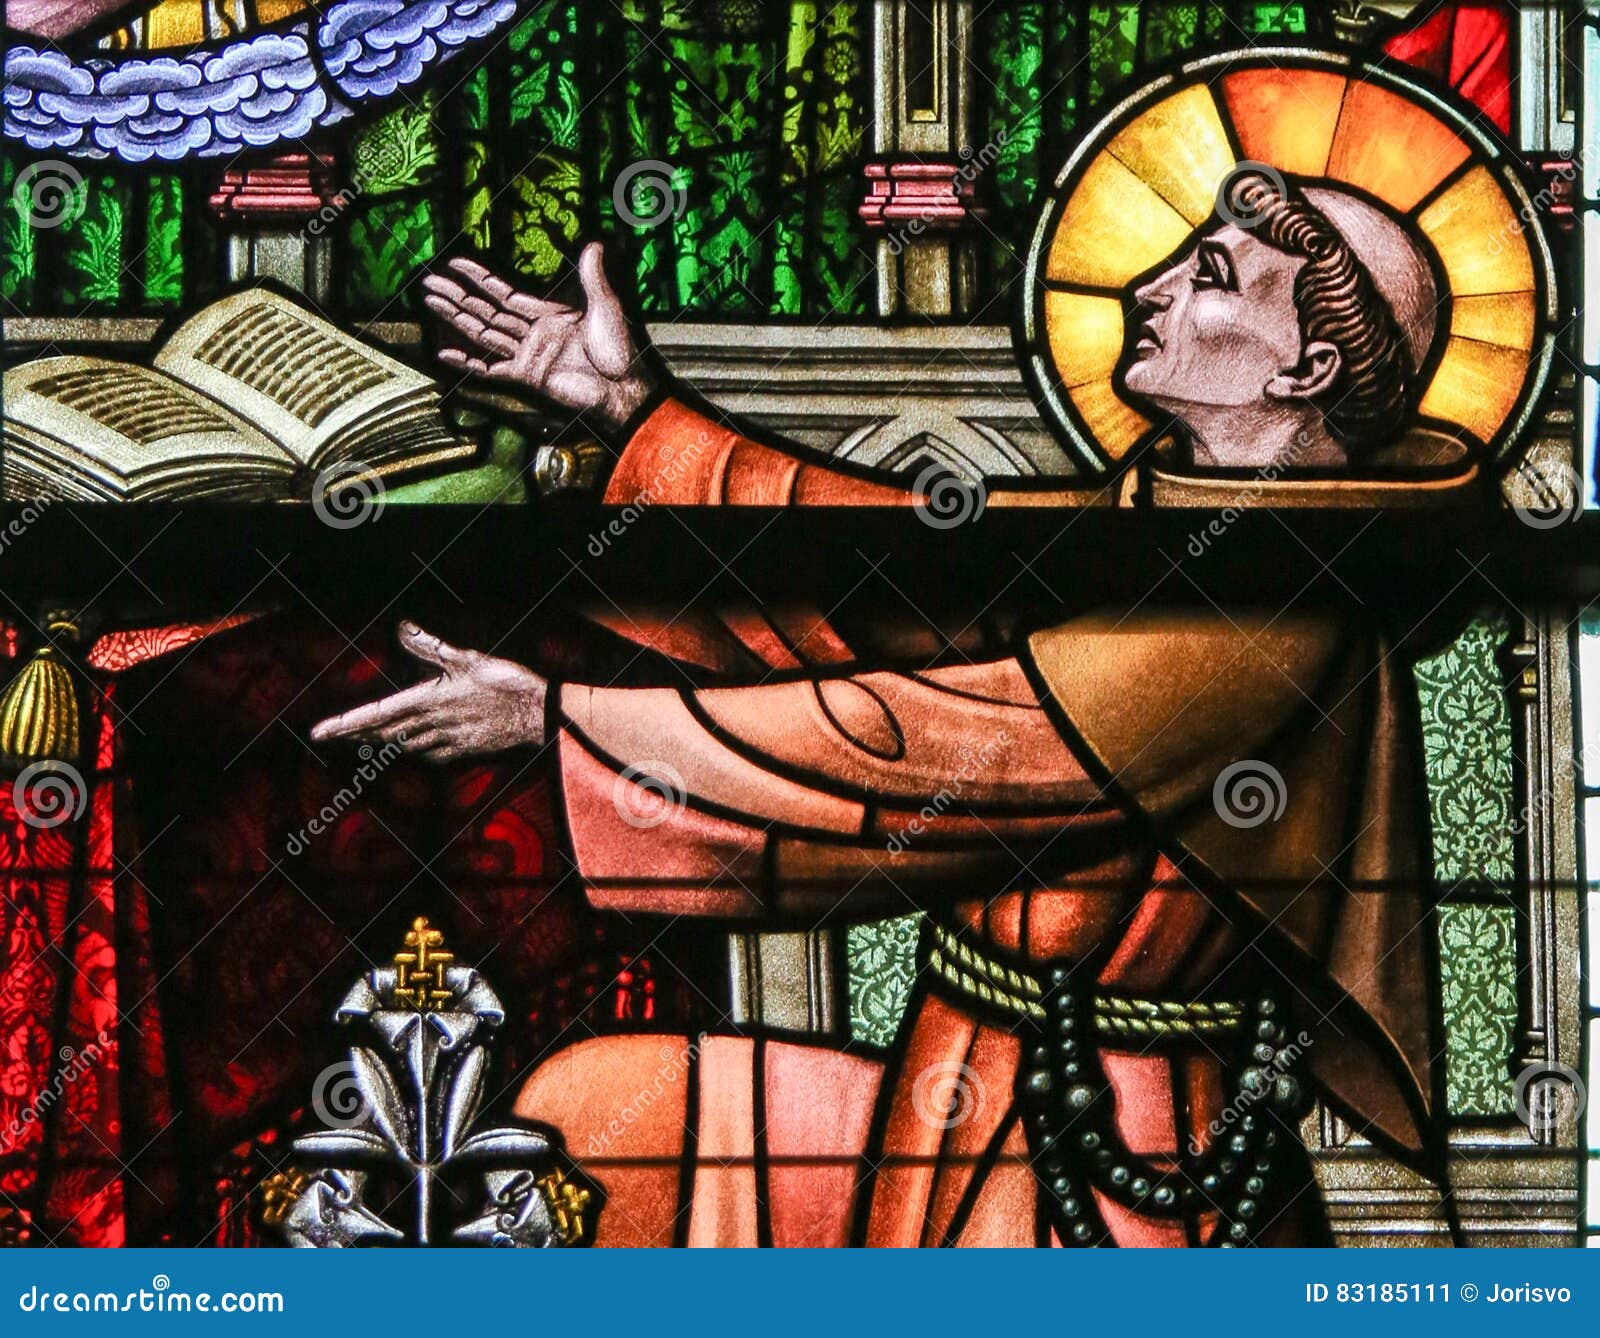 stained glass - saint anthony of padua